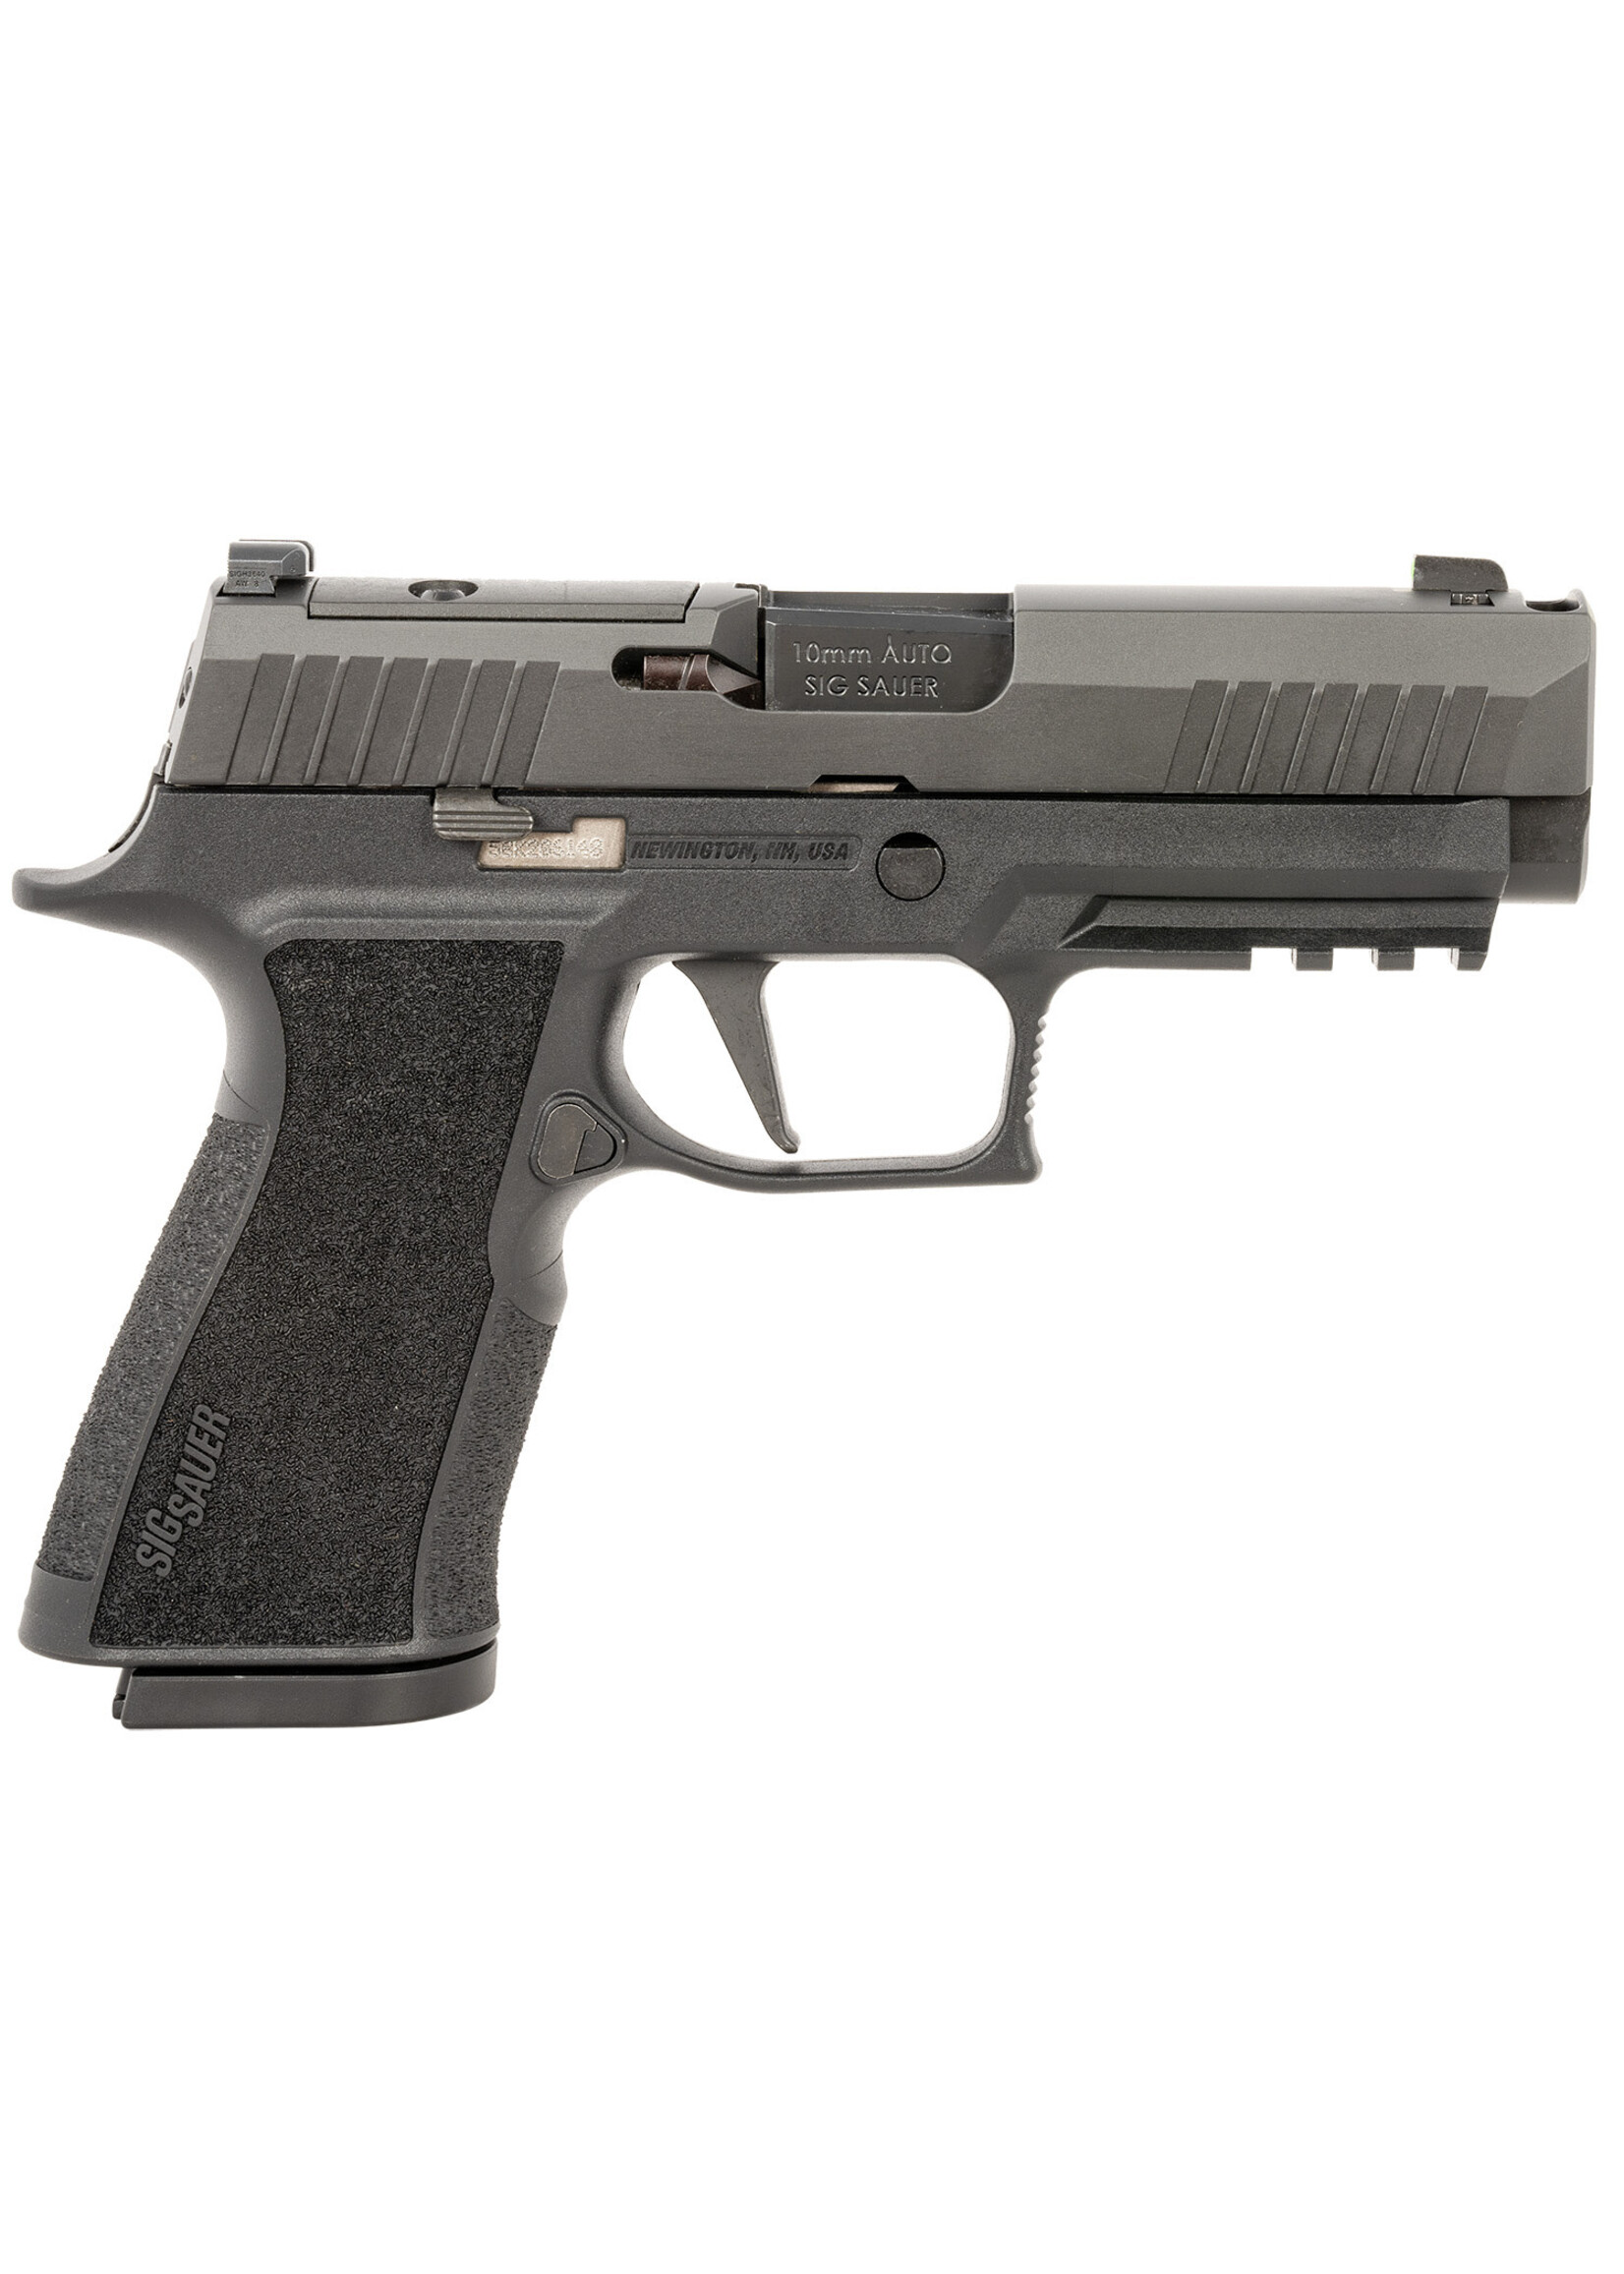 Sig Sauer Sig Sauer 320XCA10COMP P320 XTen COMP Compact Frame 10mm Auto 15+1, 3.80" Black Bull Barrel, Black Nitron Integrated Compensation/Optic Ready/Serrated Stainless Steel Slide, Black Polymer Frame w/Beavertail, Picatinny Rail & XCarry Grip, No Manua